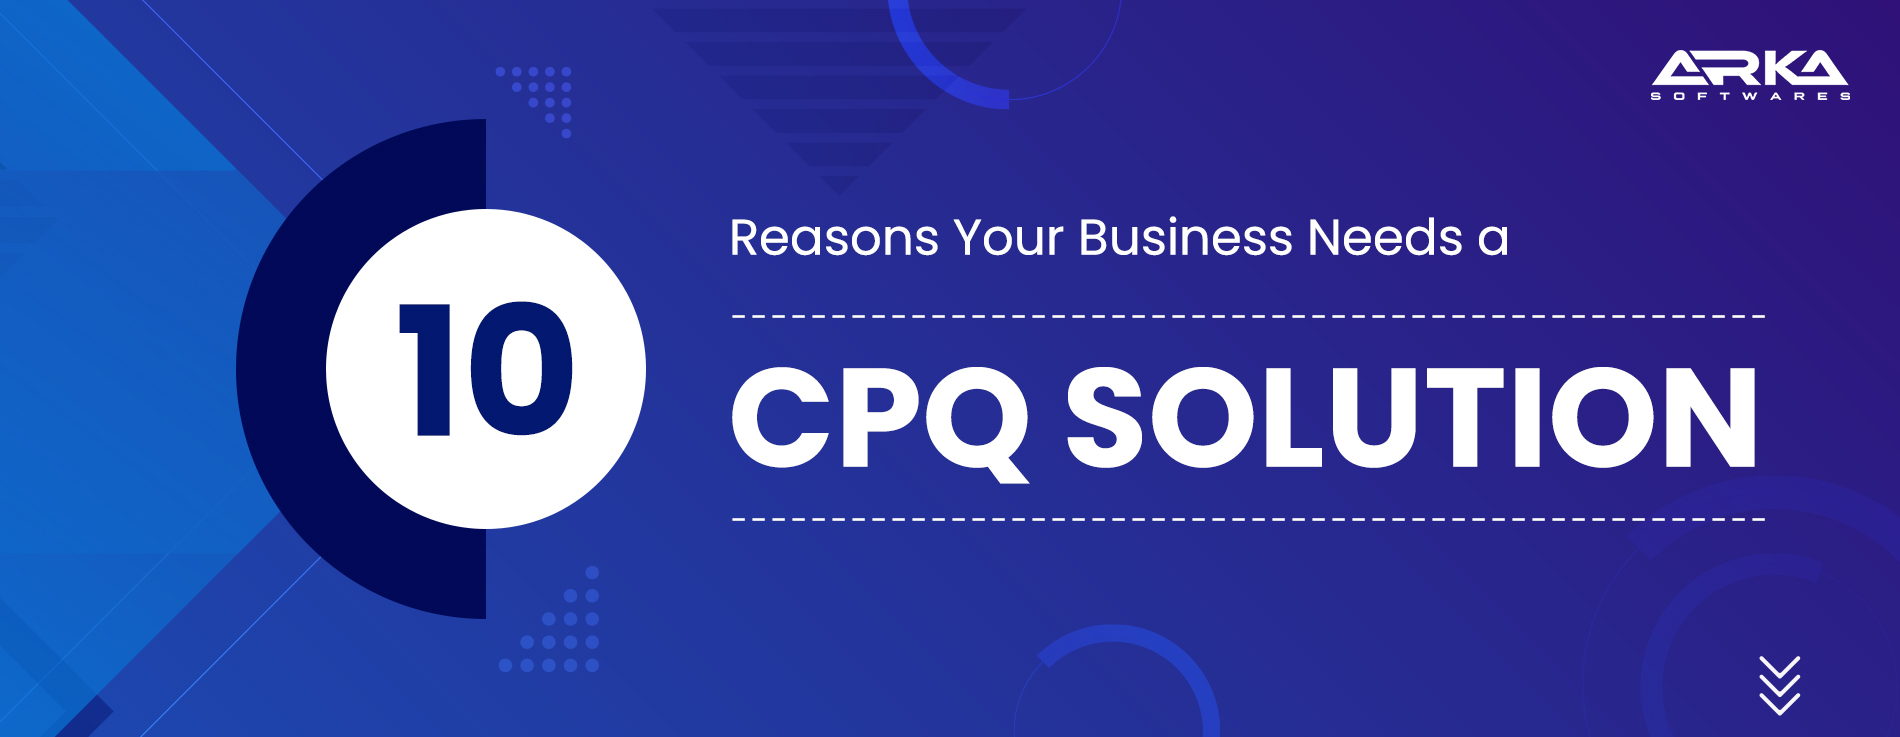 10 Reasons Why Your Business Needs Salesforce CPQ Solution